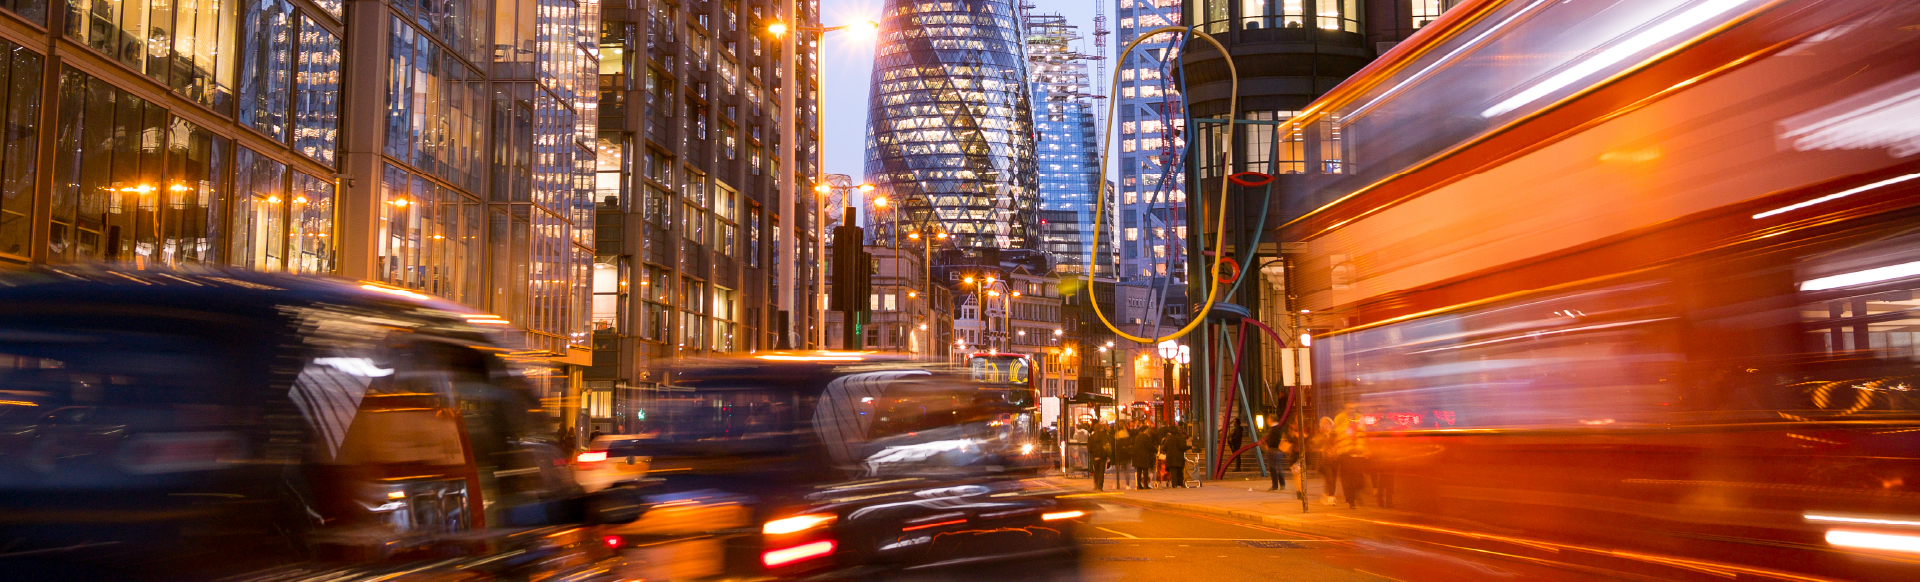 Night shot of a street in the City of London with a motion blur effect on the cars